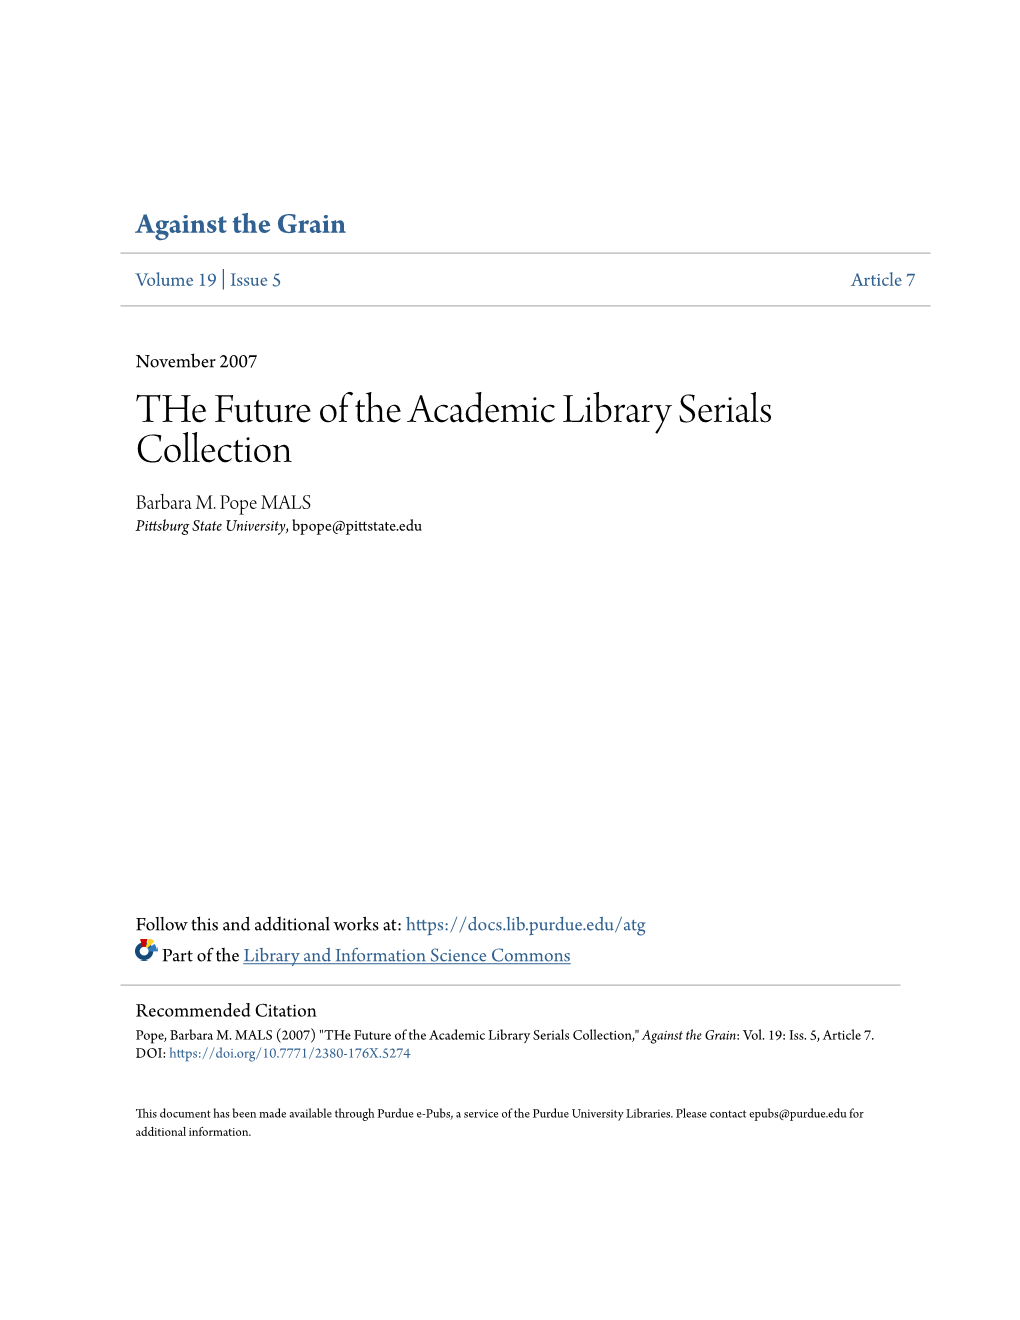 The Future of the Academic Library Serials Collection Barbara M